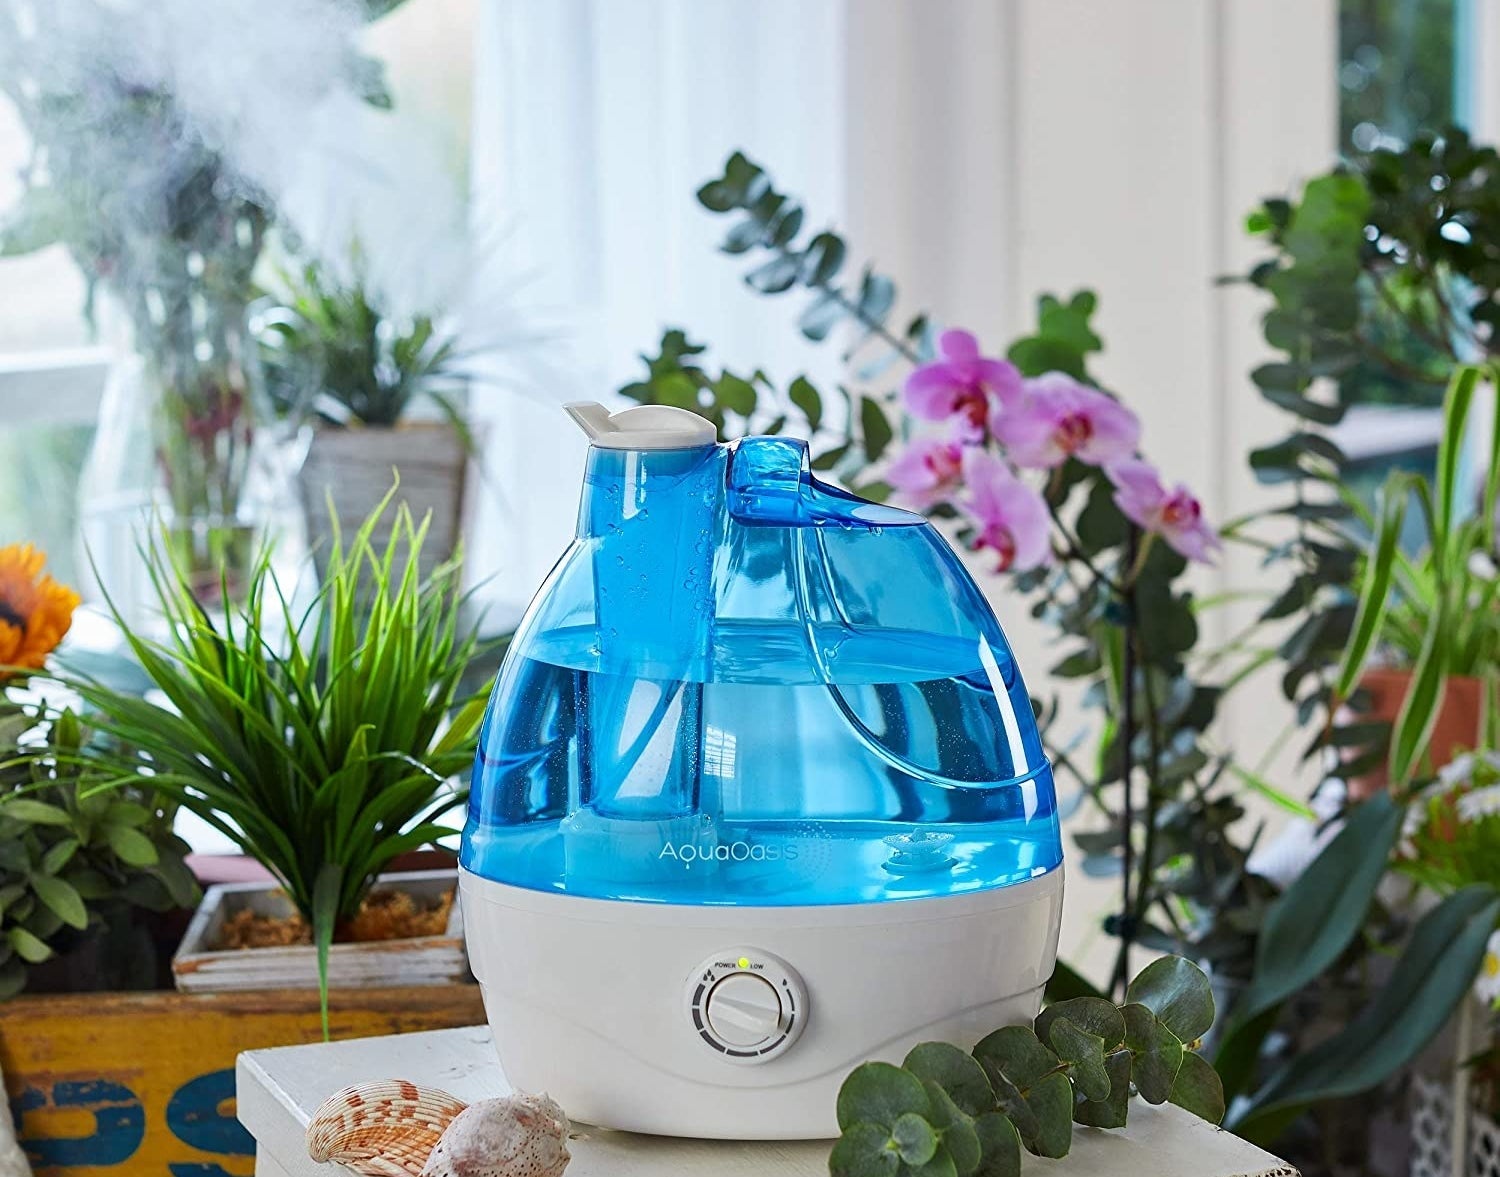 the humidifier filled with water